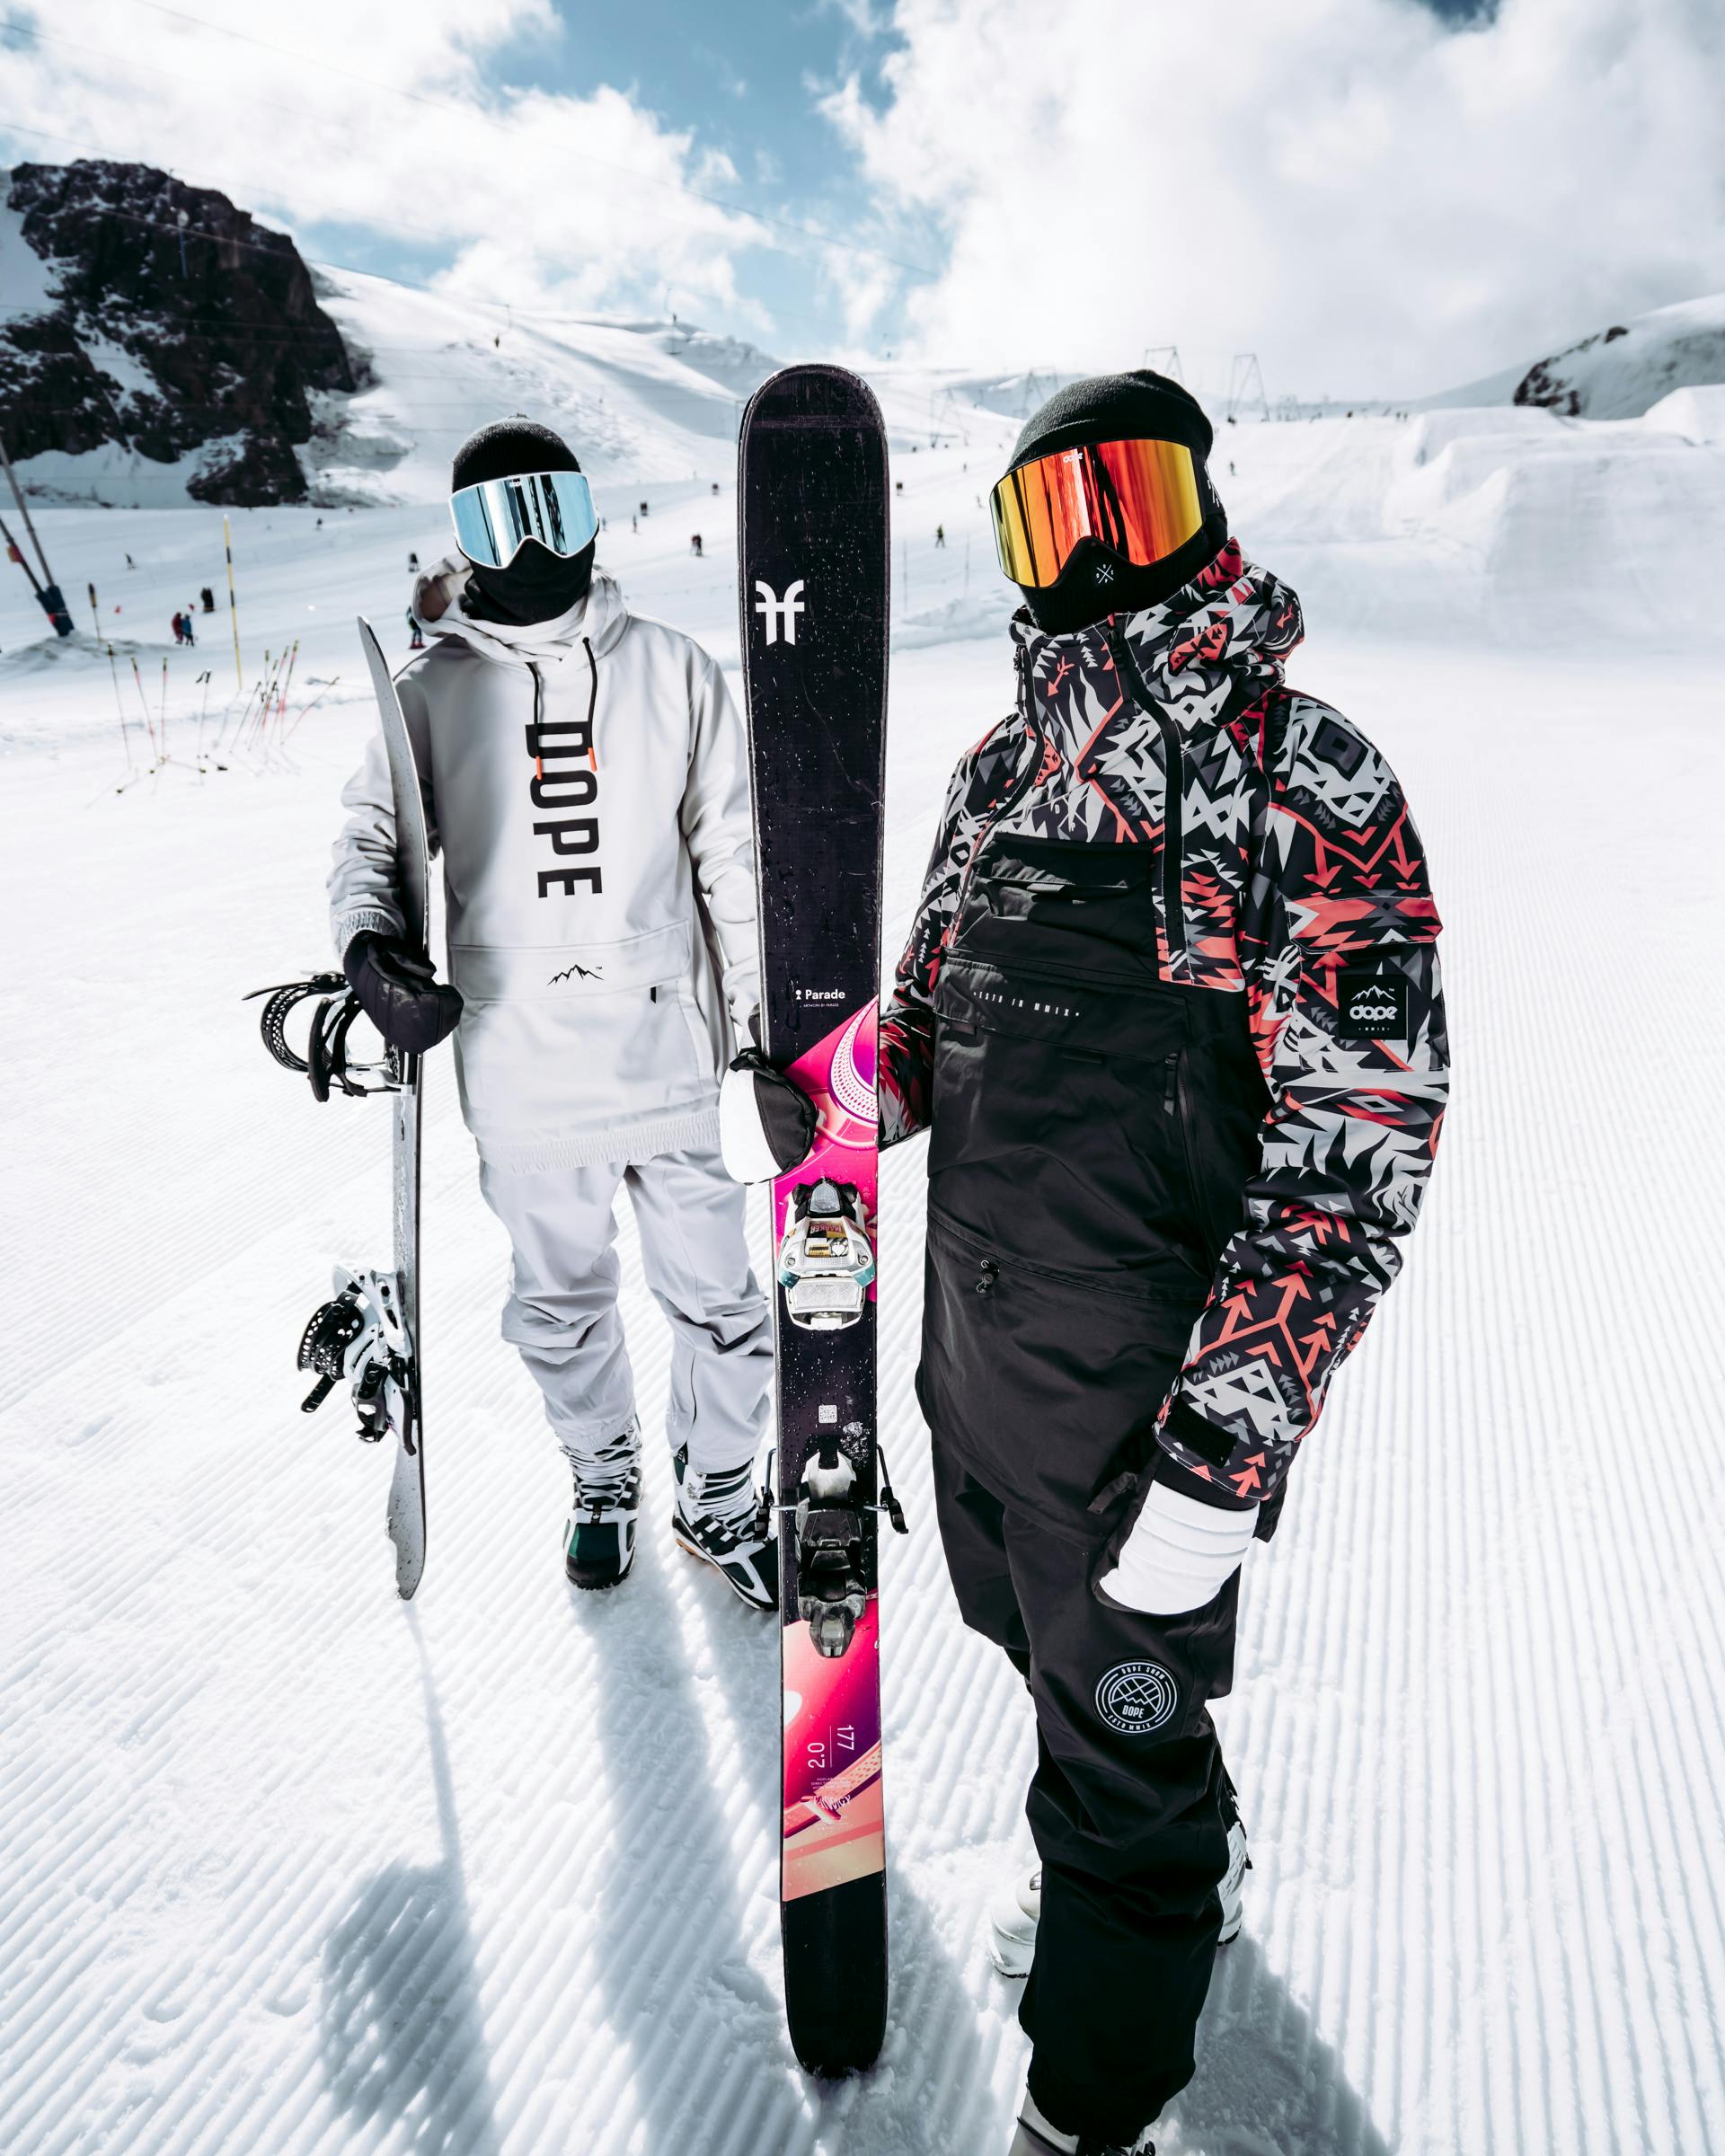 title puberty to manage What to Wear Skiing Or Snowboarding | Ridestore Magazine